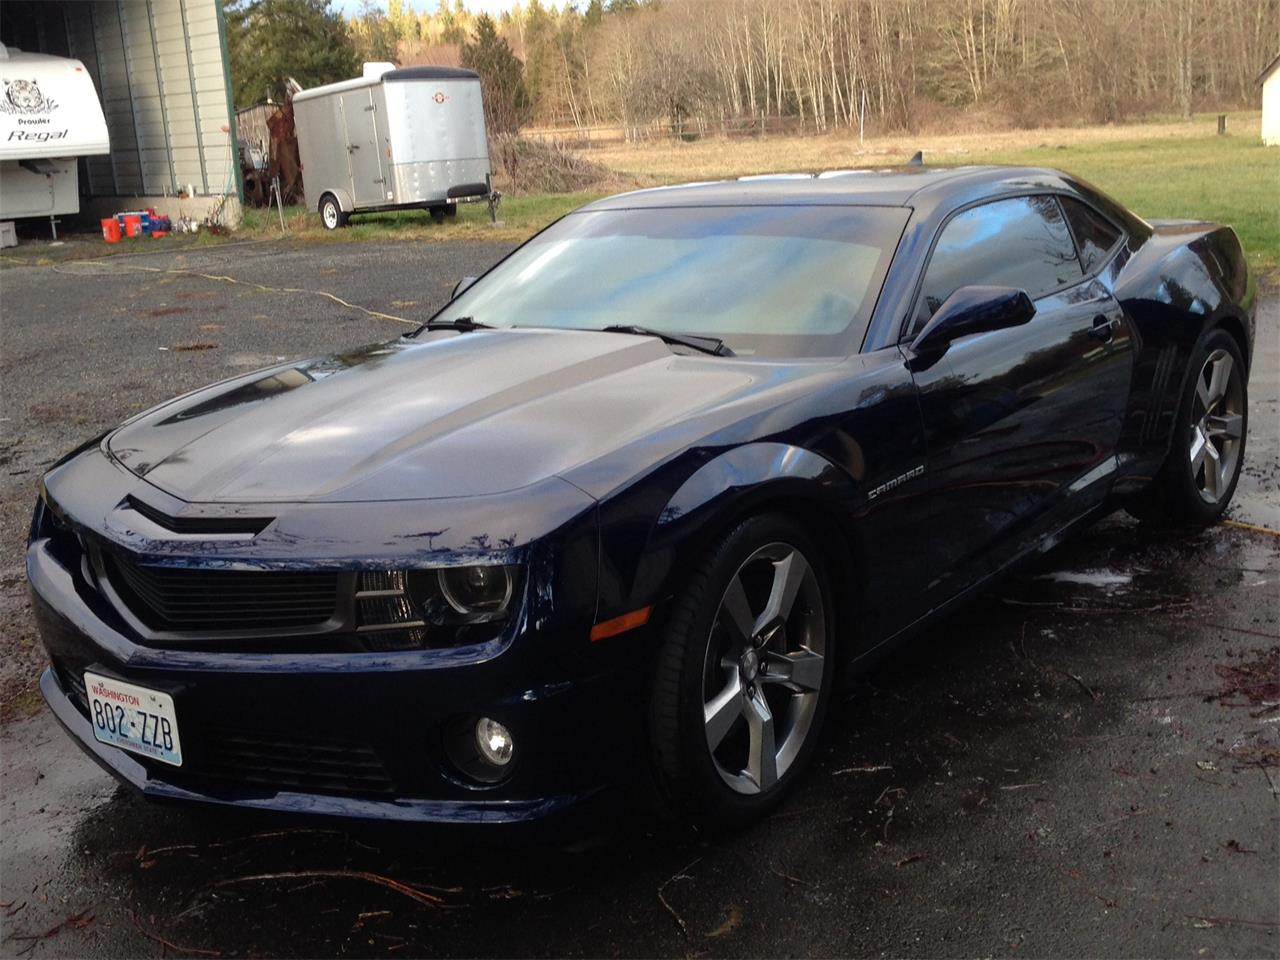 For Sale at Auction: 2010 Chevrolet Camaro for sale in Tacoma, WA